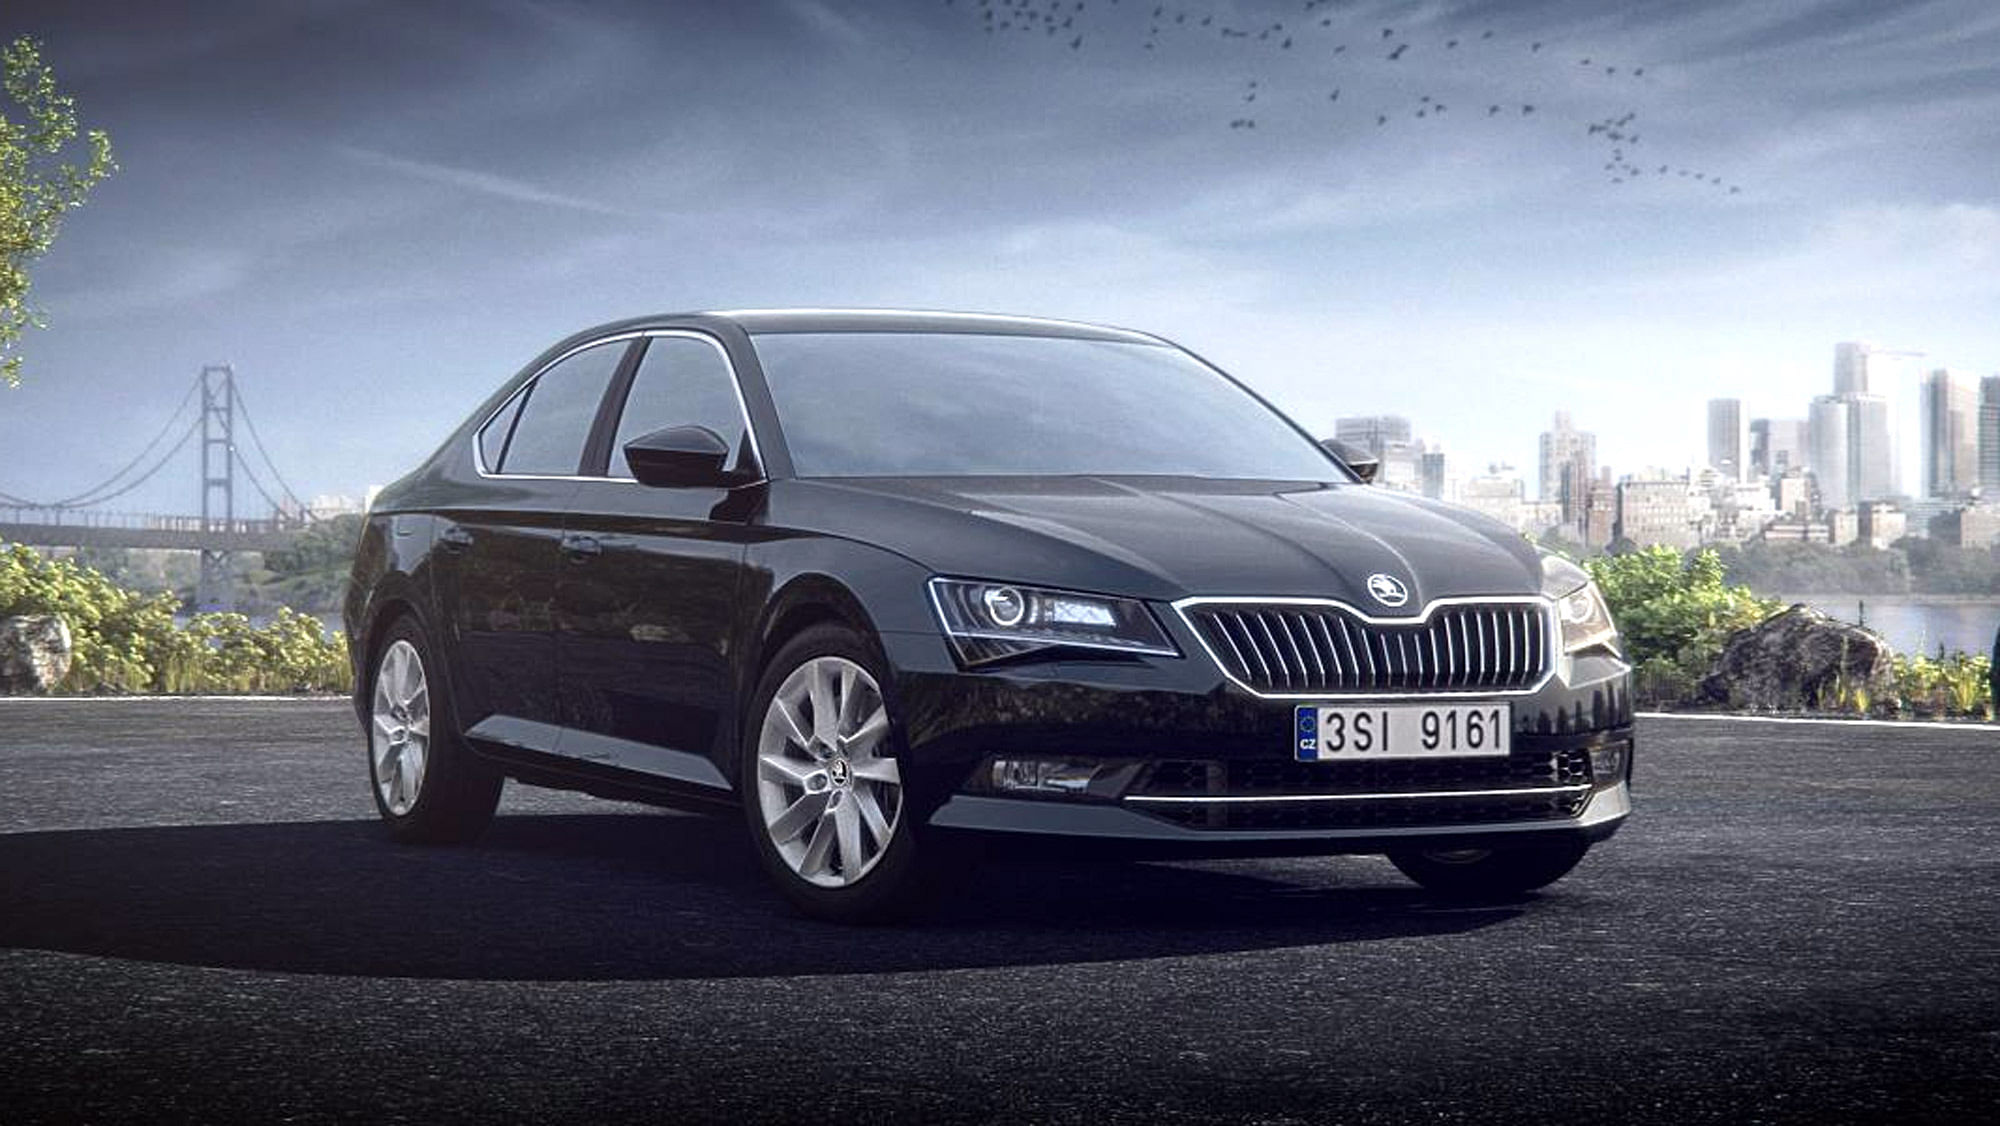 

Skoda Superb. (Photo Courtesy: <a href="http://www.skoda-auto.co.in/models/newsuperb/pages/overview.aspx">Skoda India</a>)